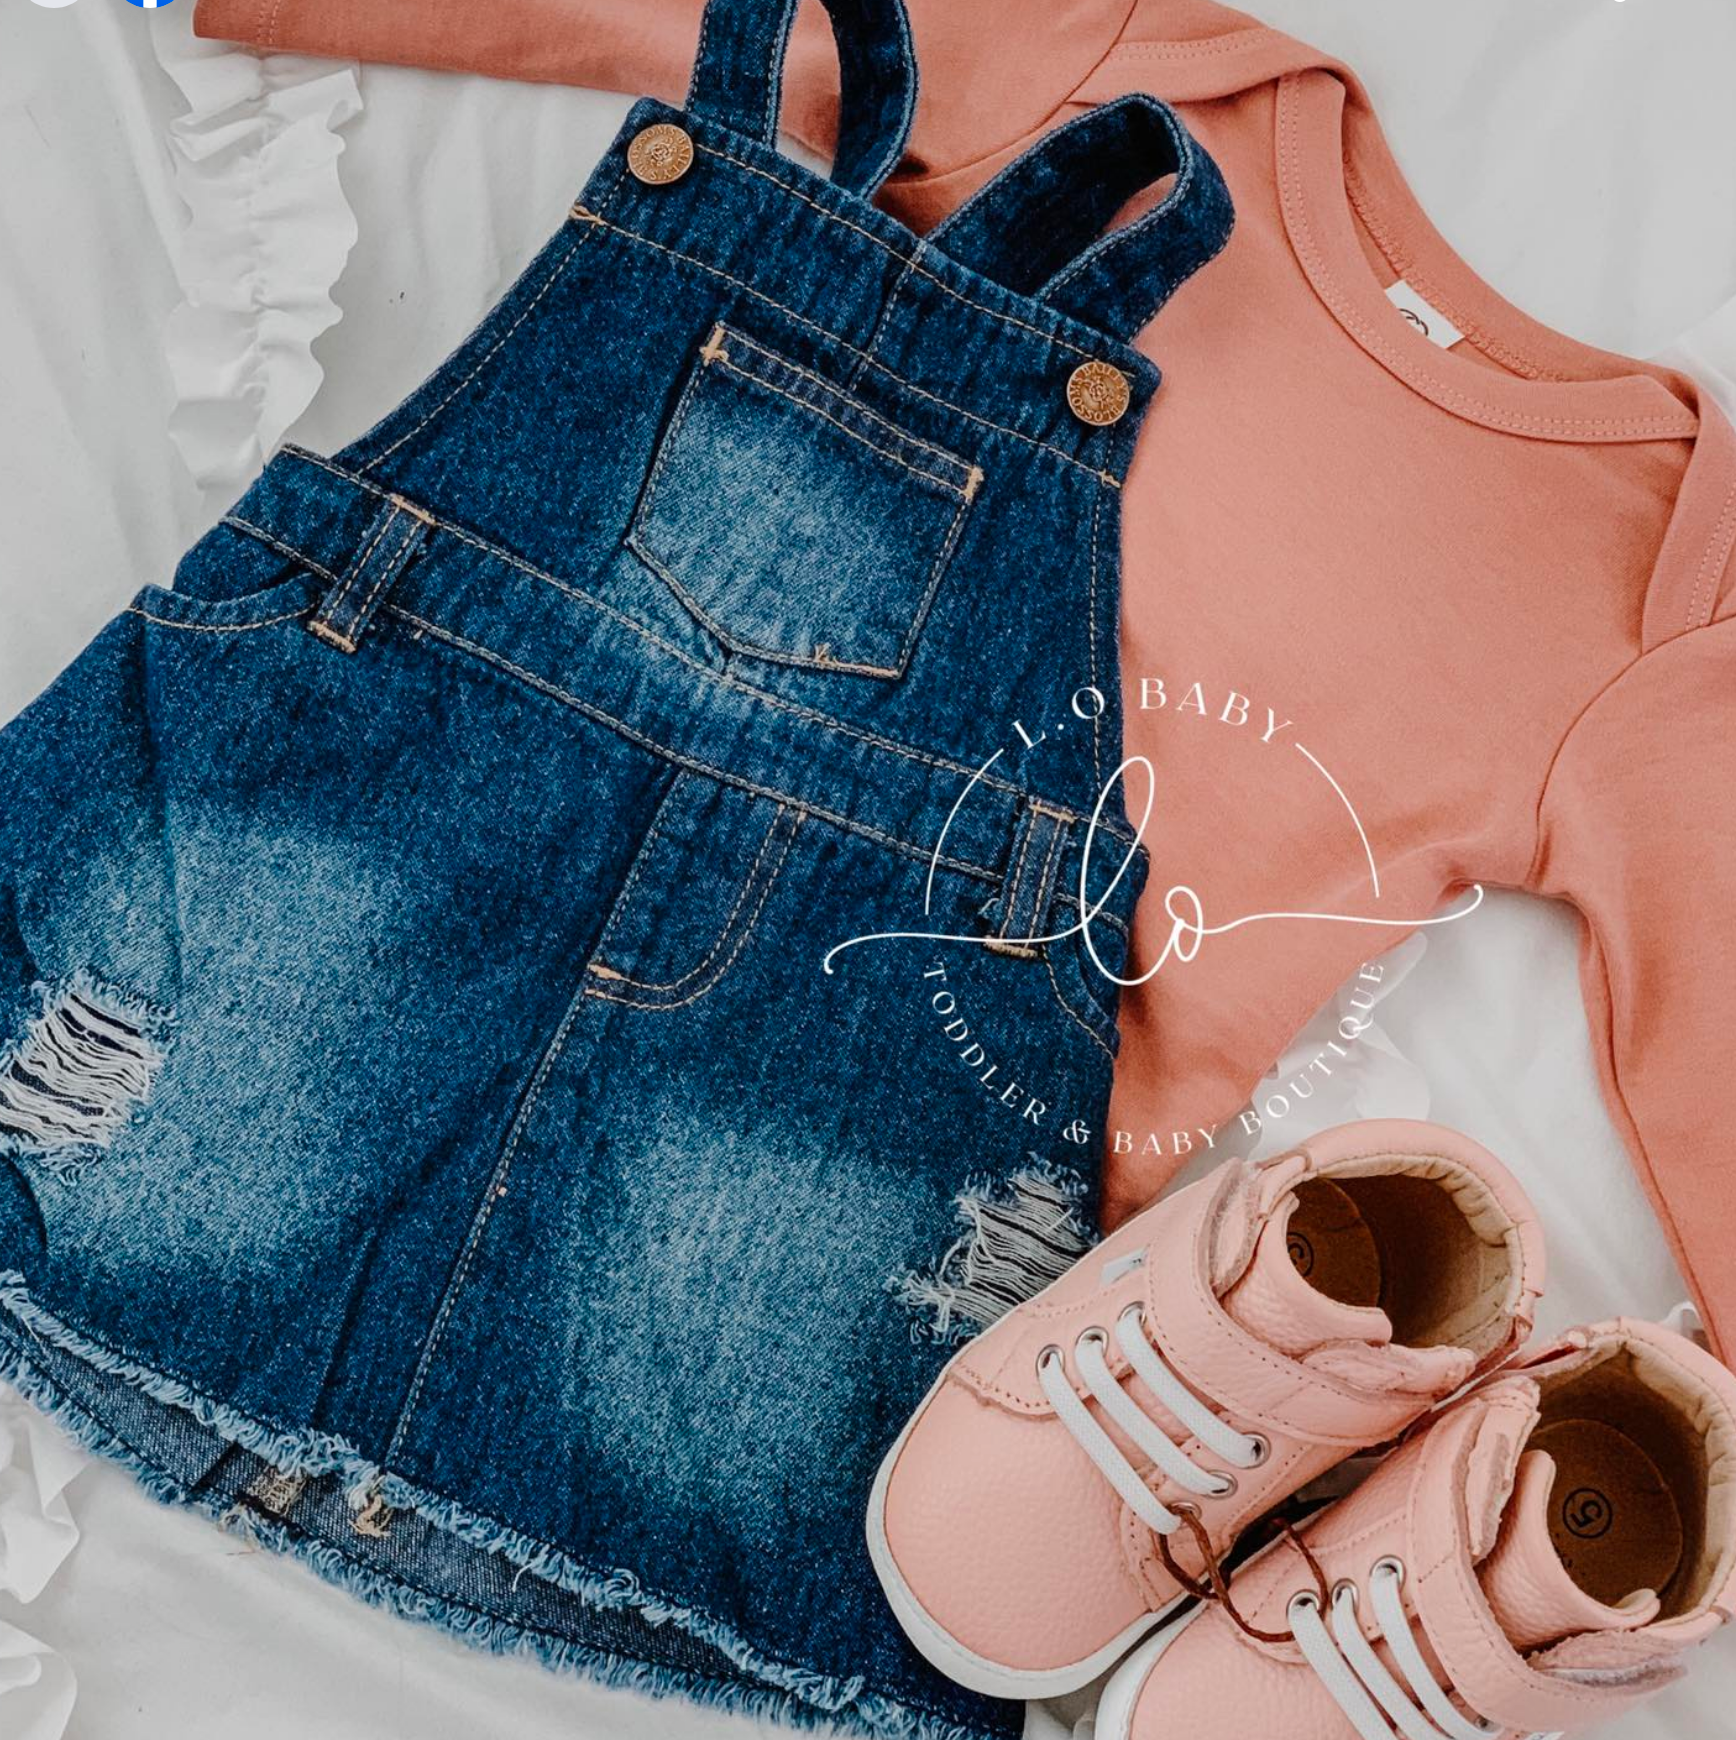 Baby Girl Cotton Denim Strap Maternity Denim Skirt With Suspender Dress For  Autumn/Winter Infant/Toddler Outfit 1 10Y From Diao08, $15.46 | DHgate.Com